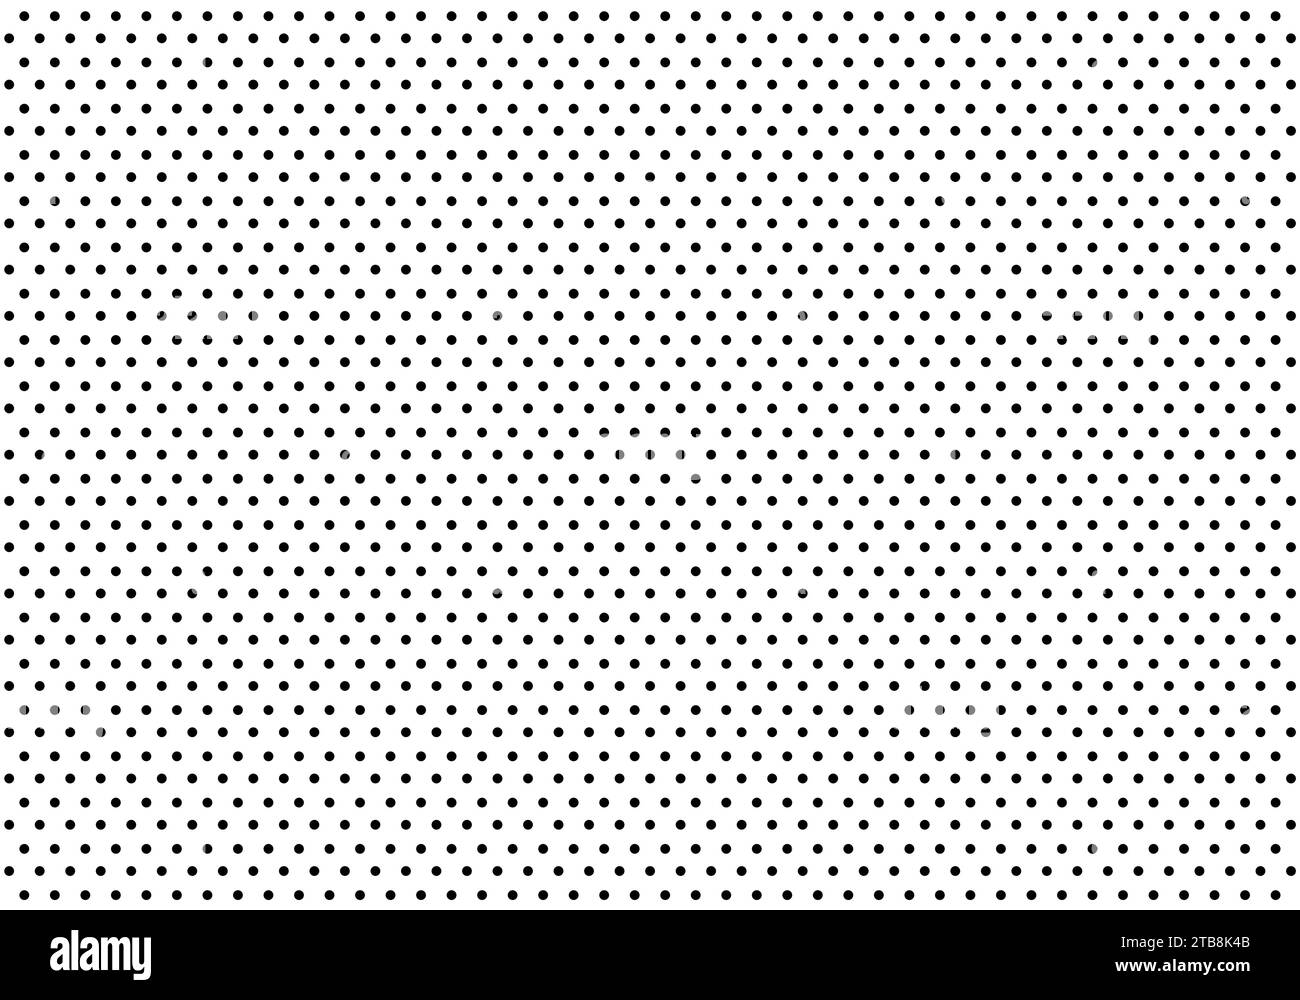 black and white mesh metal grid background Stock Vector